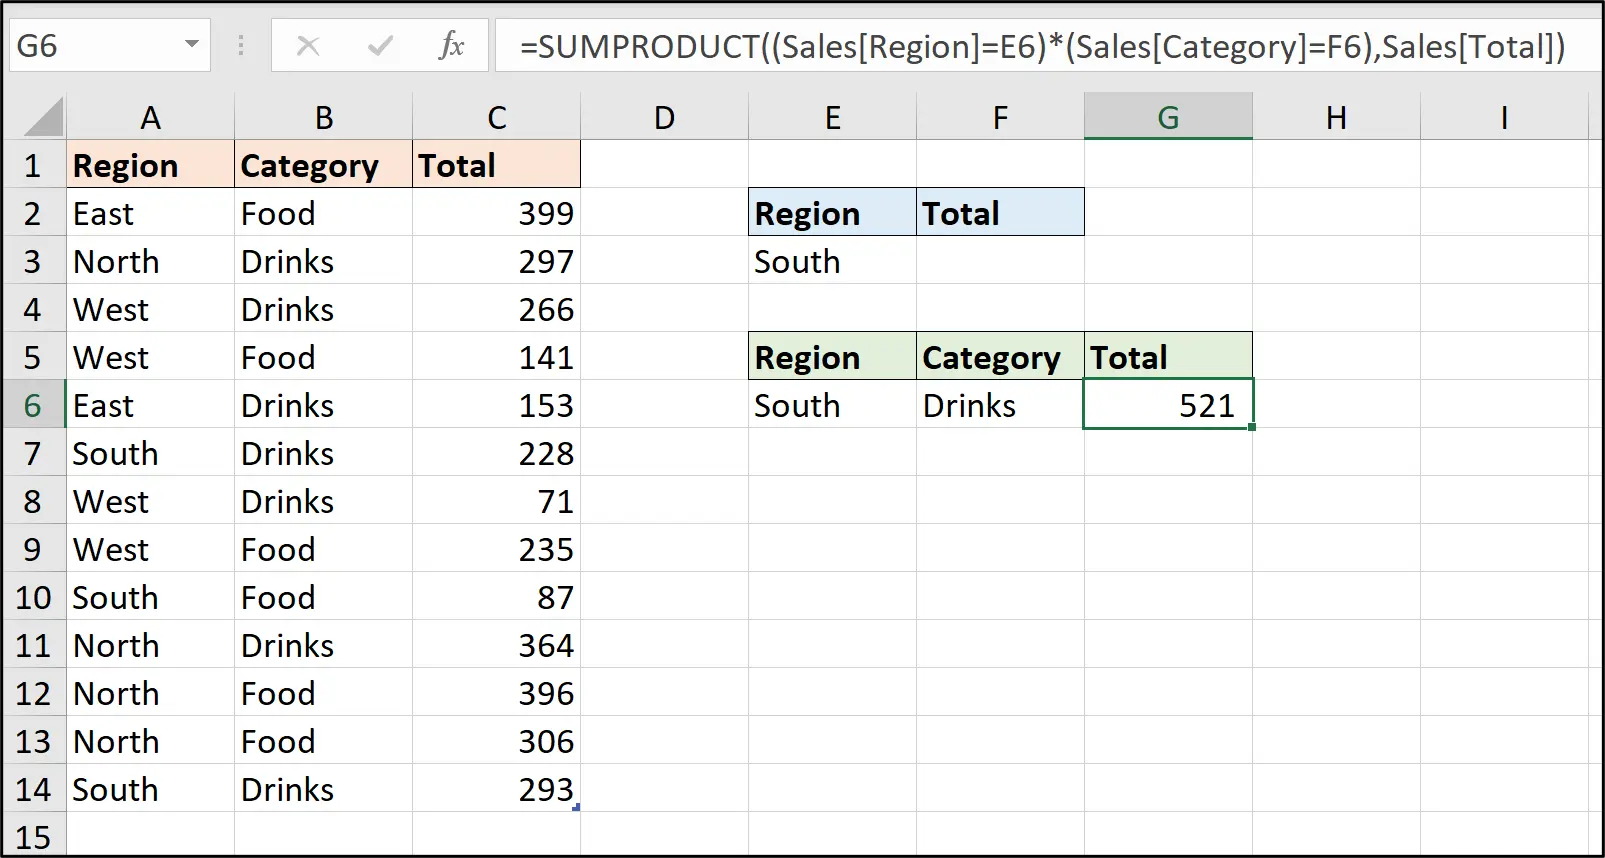 The and logic being used with the SUMPRODUCT function in Excel